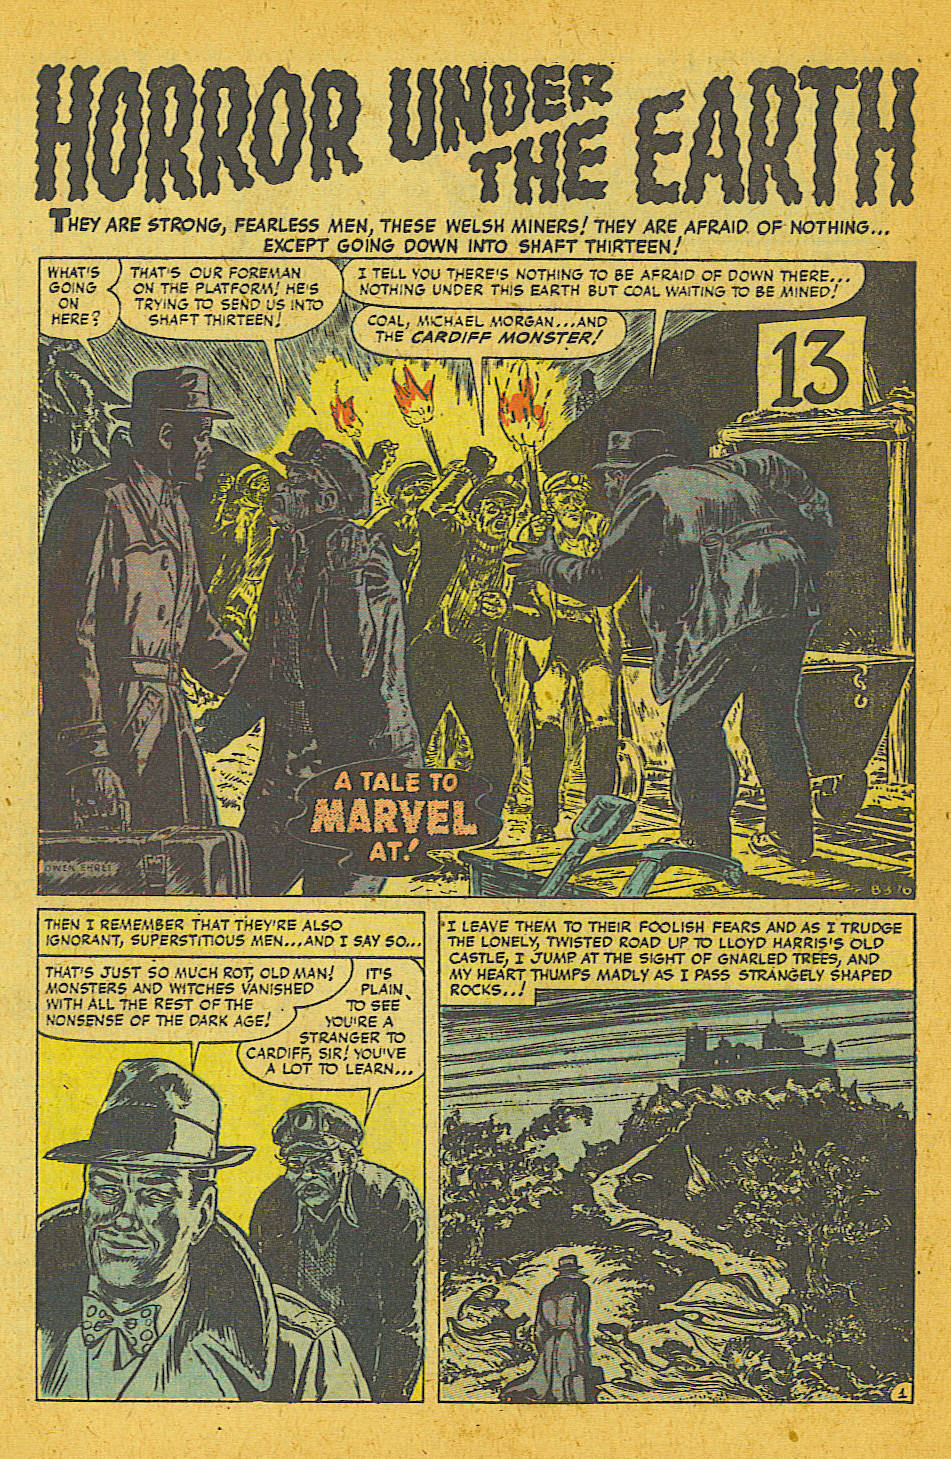 Marvel Tales (1949) 111 Page 15